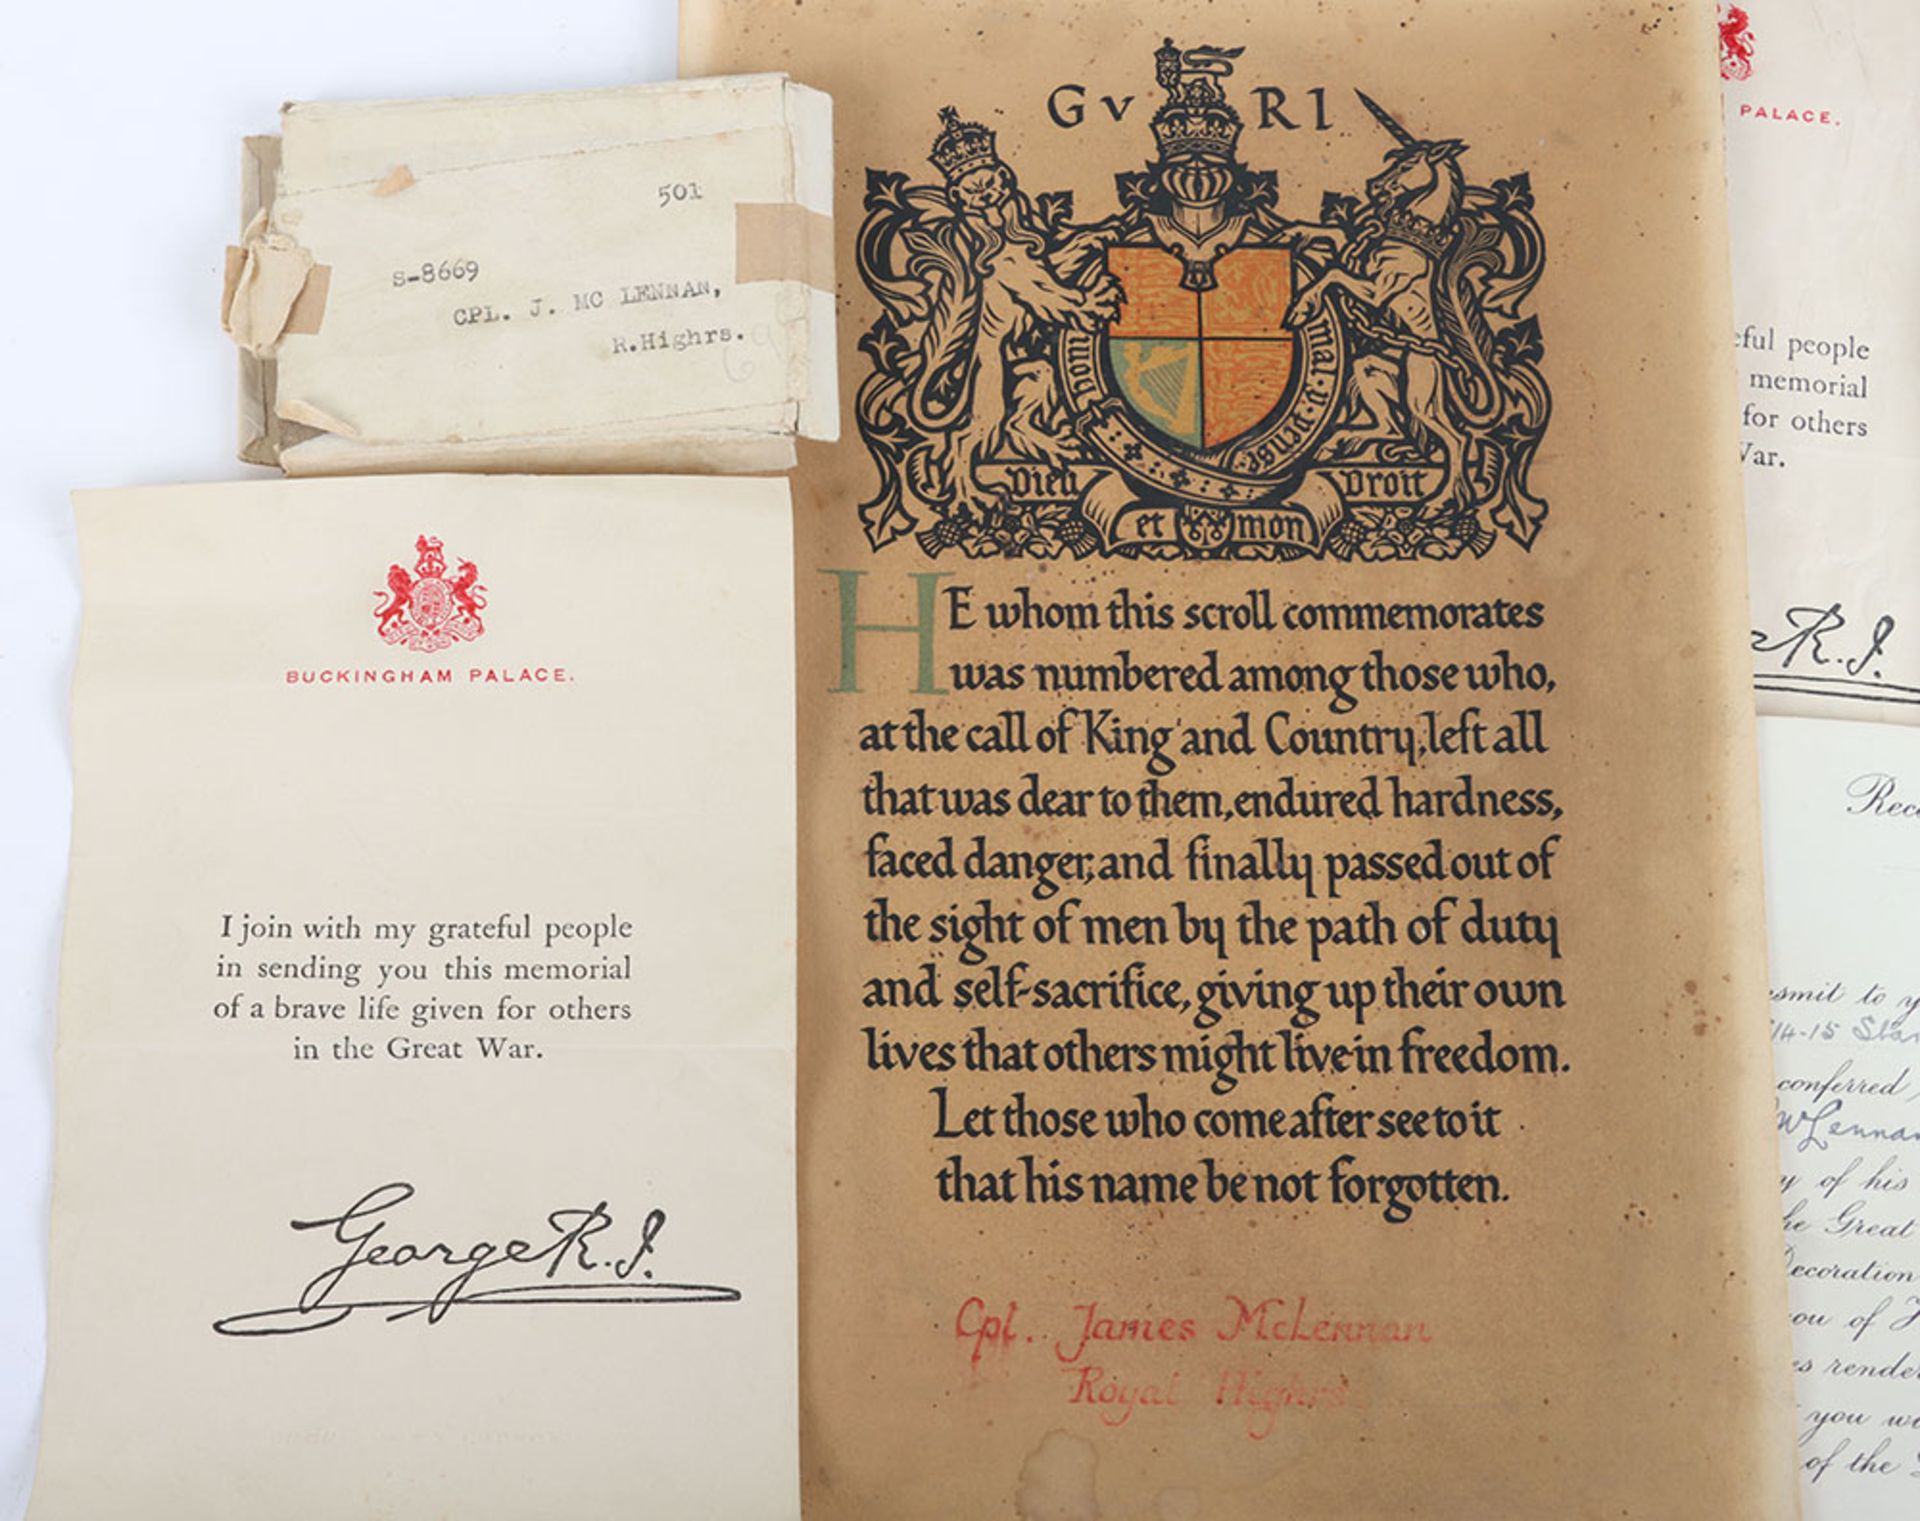 2x Great War Memorial Scrolls and Other Items to Scottish Regiments - Image 4 of 4